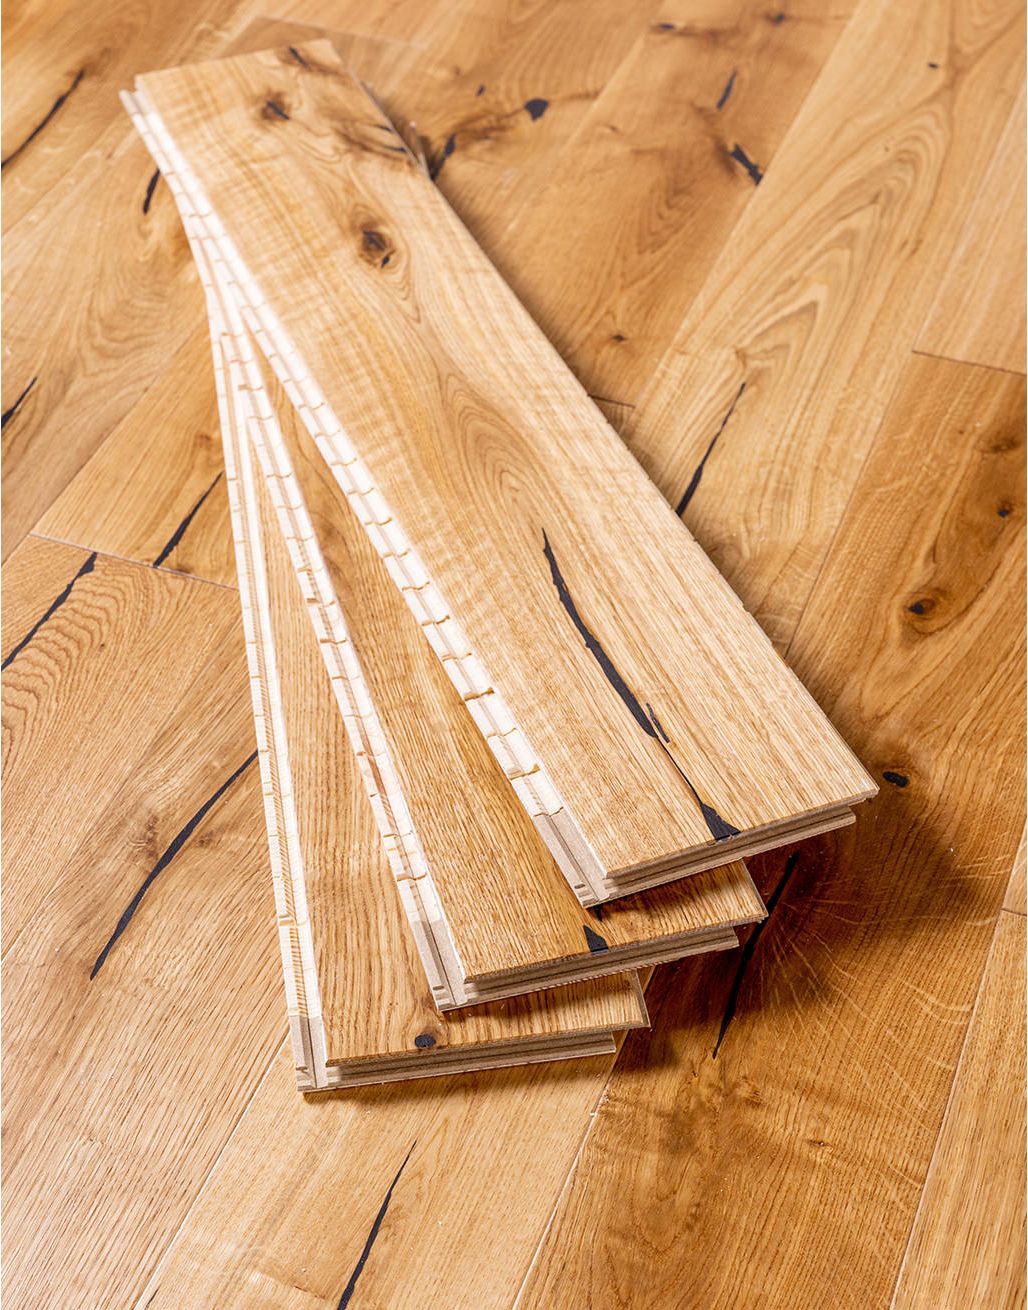 Carpenters Choice 130mm - Natural Oak Lacquered Engineered Wood Flooring 3